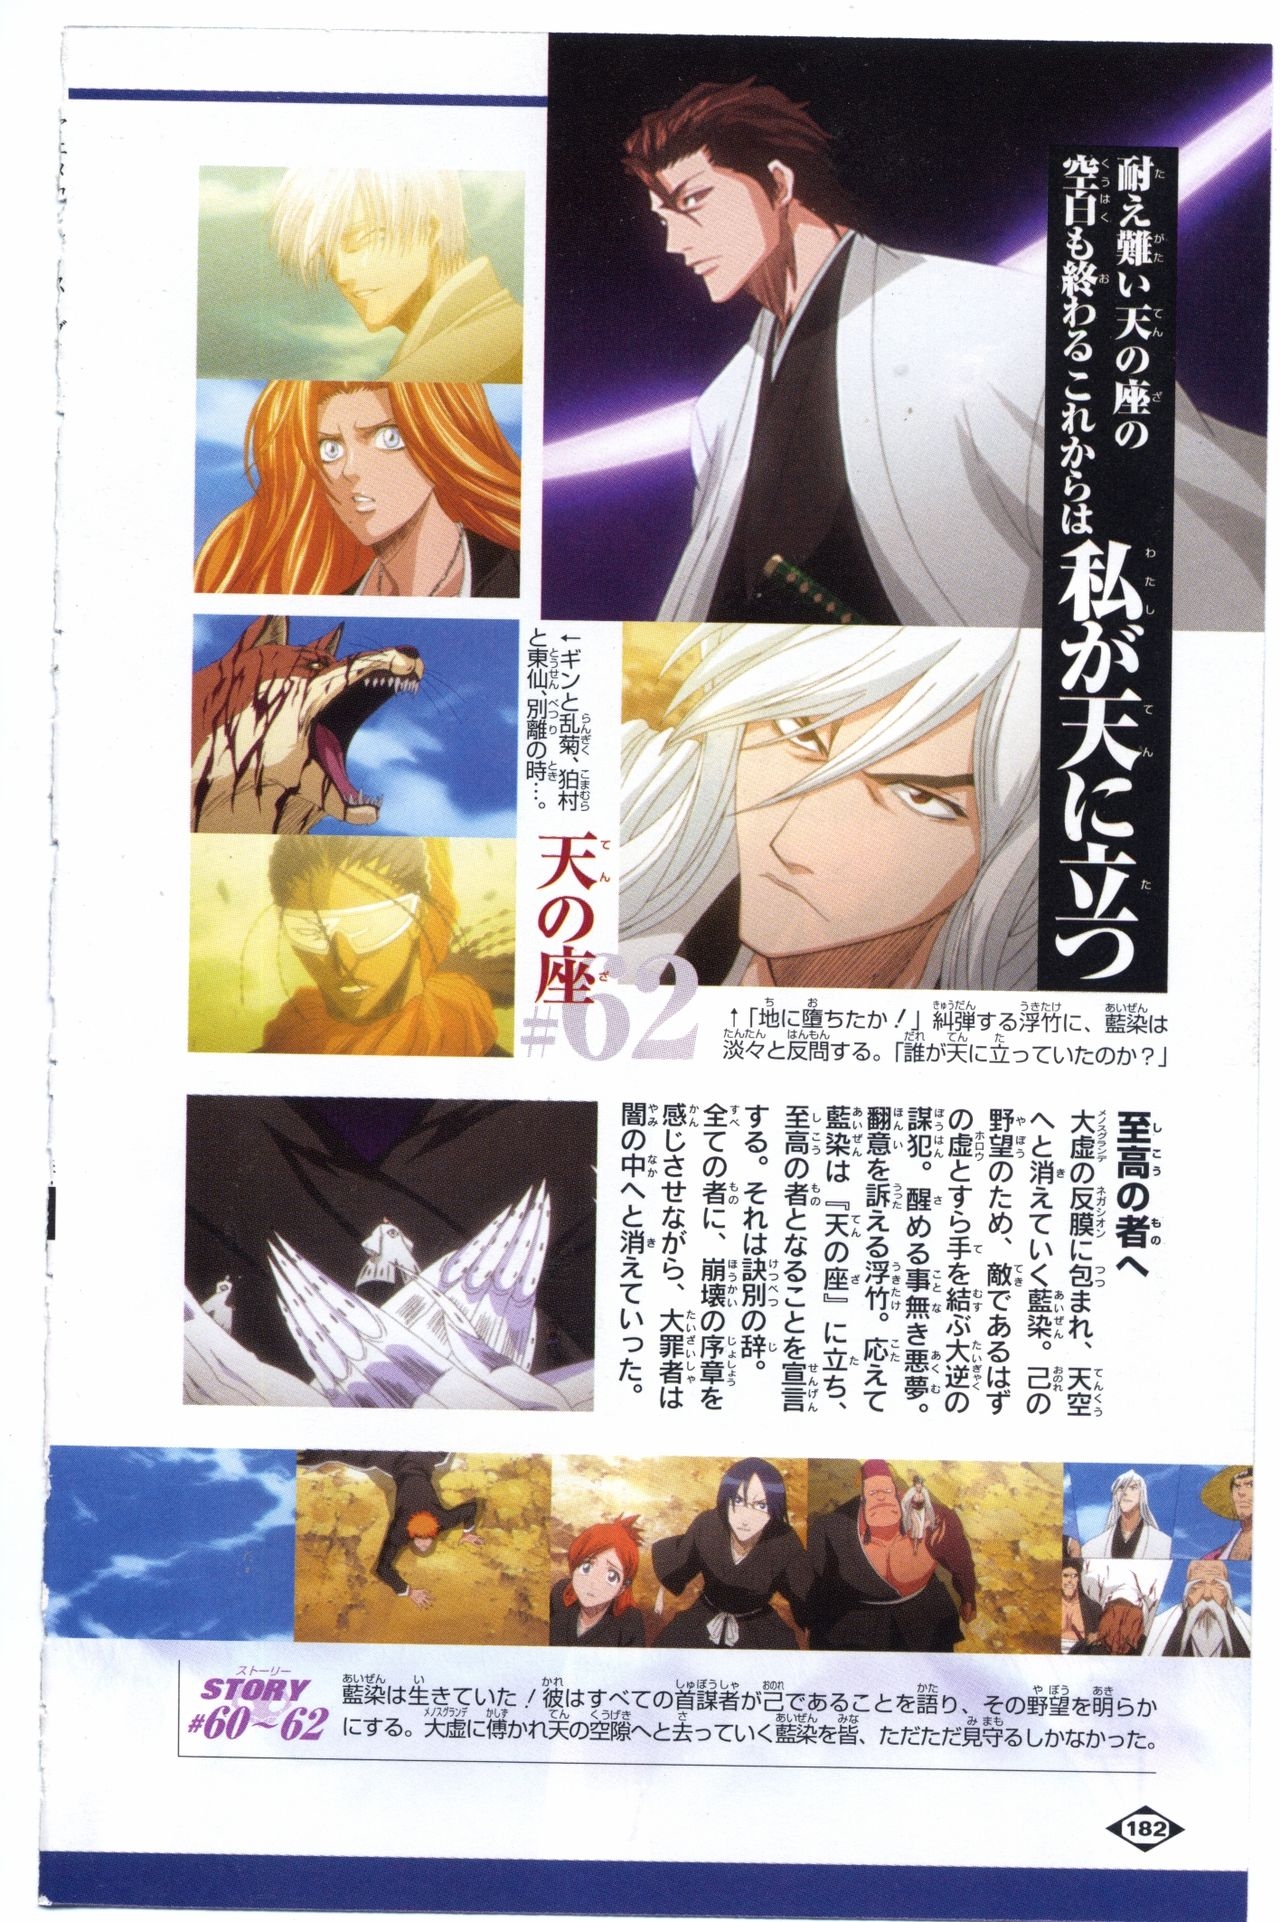 Bleach: Official Animation Book VIBEs 182